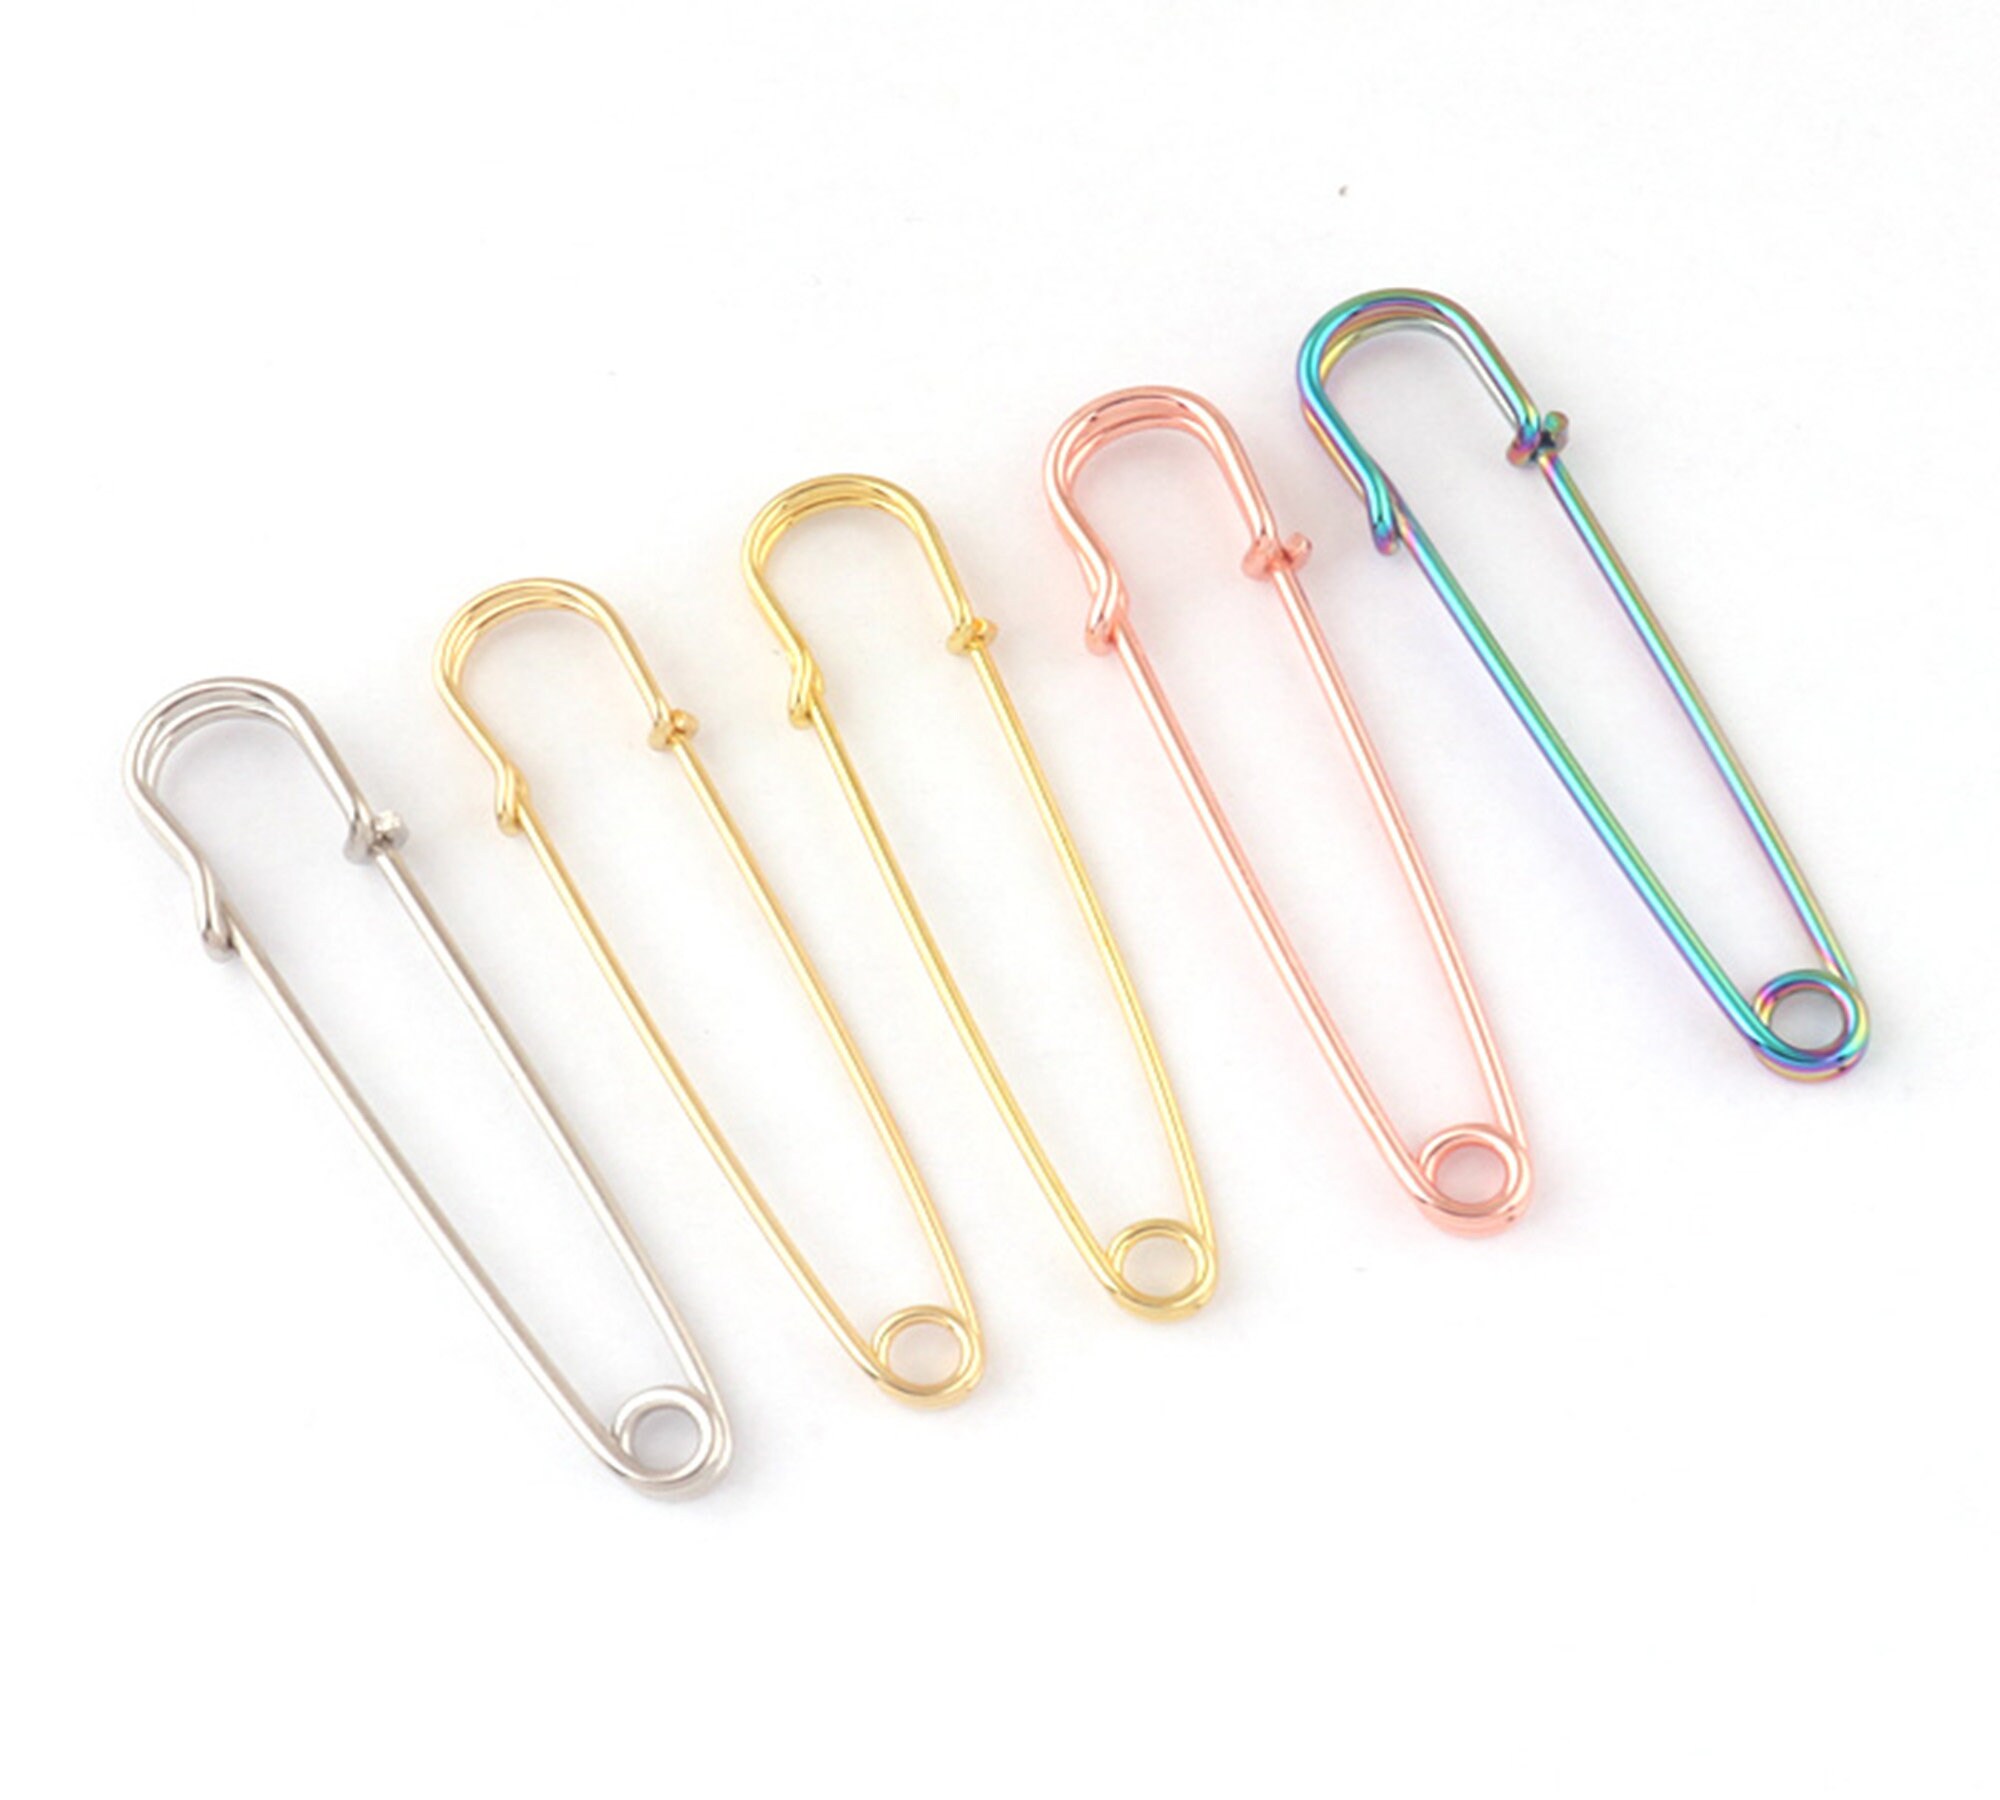 128mm Giant Safety Pin Big Over Sized Laundry Pins Kilt Pins Brooch Pin  Back Safety Pin